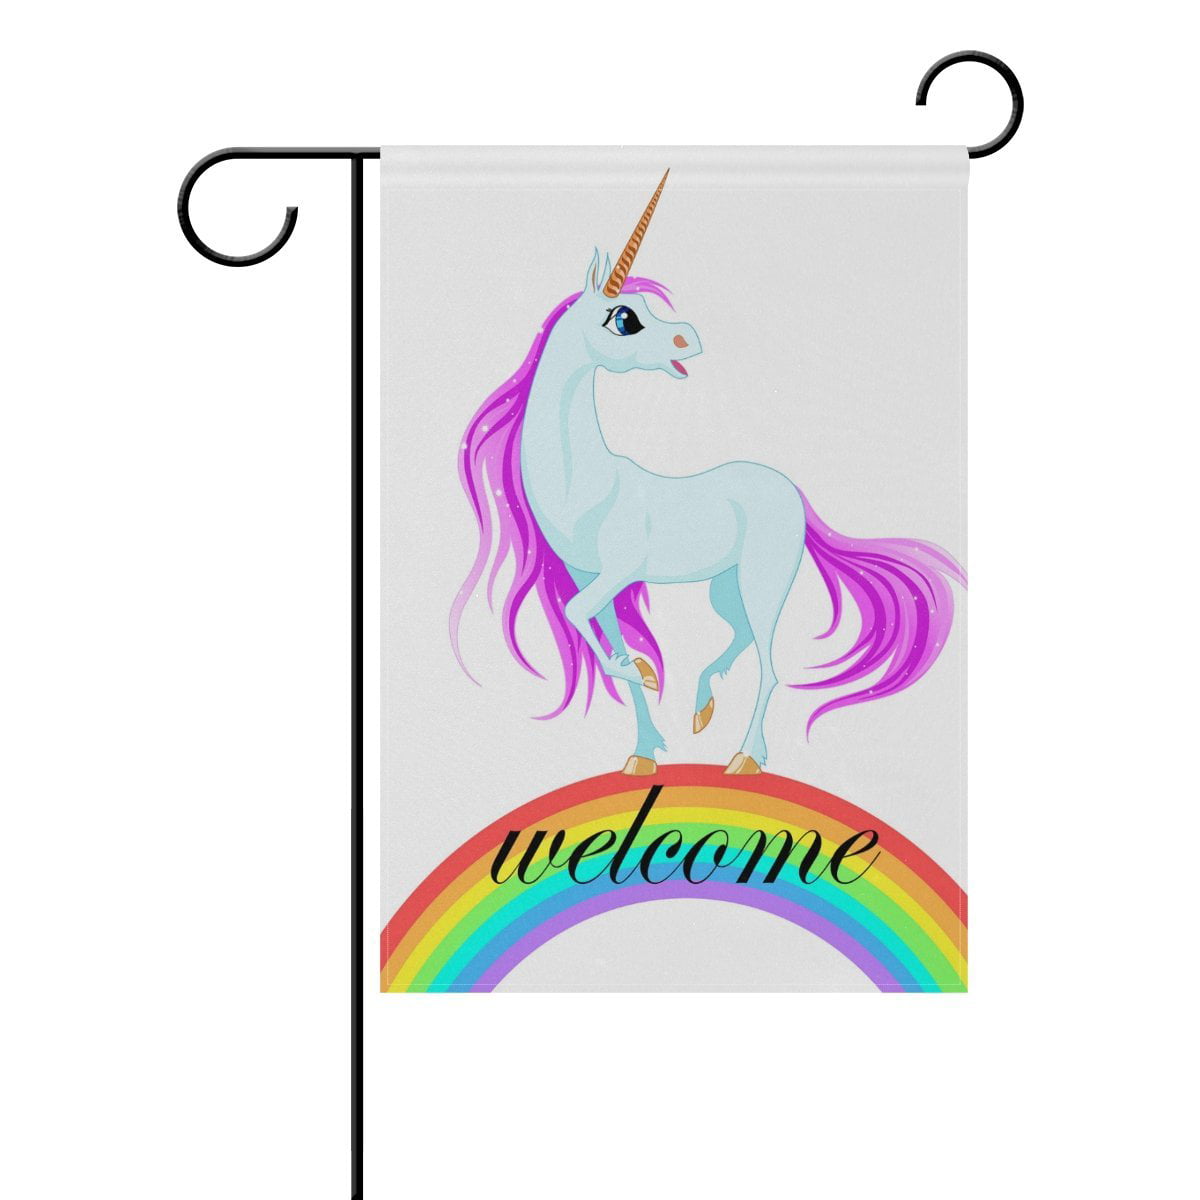 Cute Mermaid Unicorn Rainbow Tail Unicorn Blue Flag 3x5 Ft Outdoor Decorative Banner Outside Hanging Standard Flag for Yard Garden Lawn Holiday